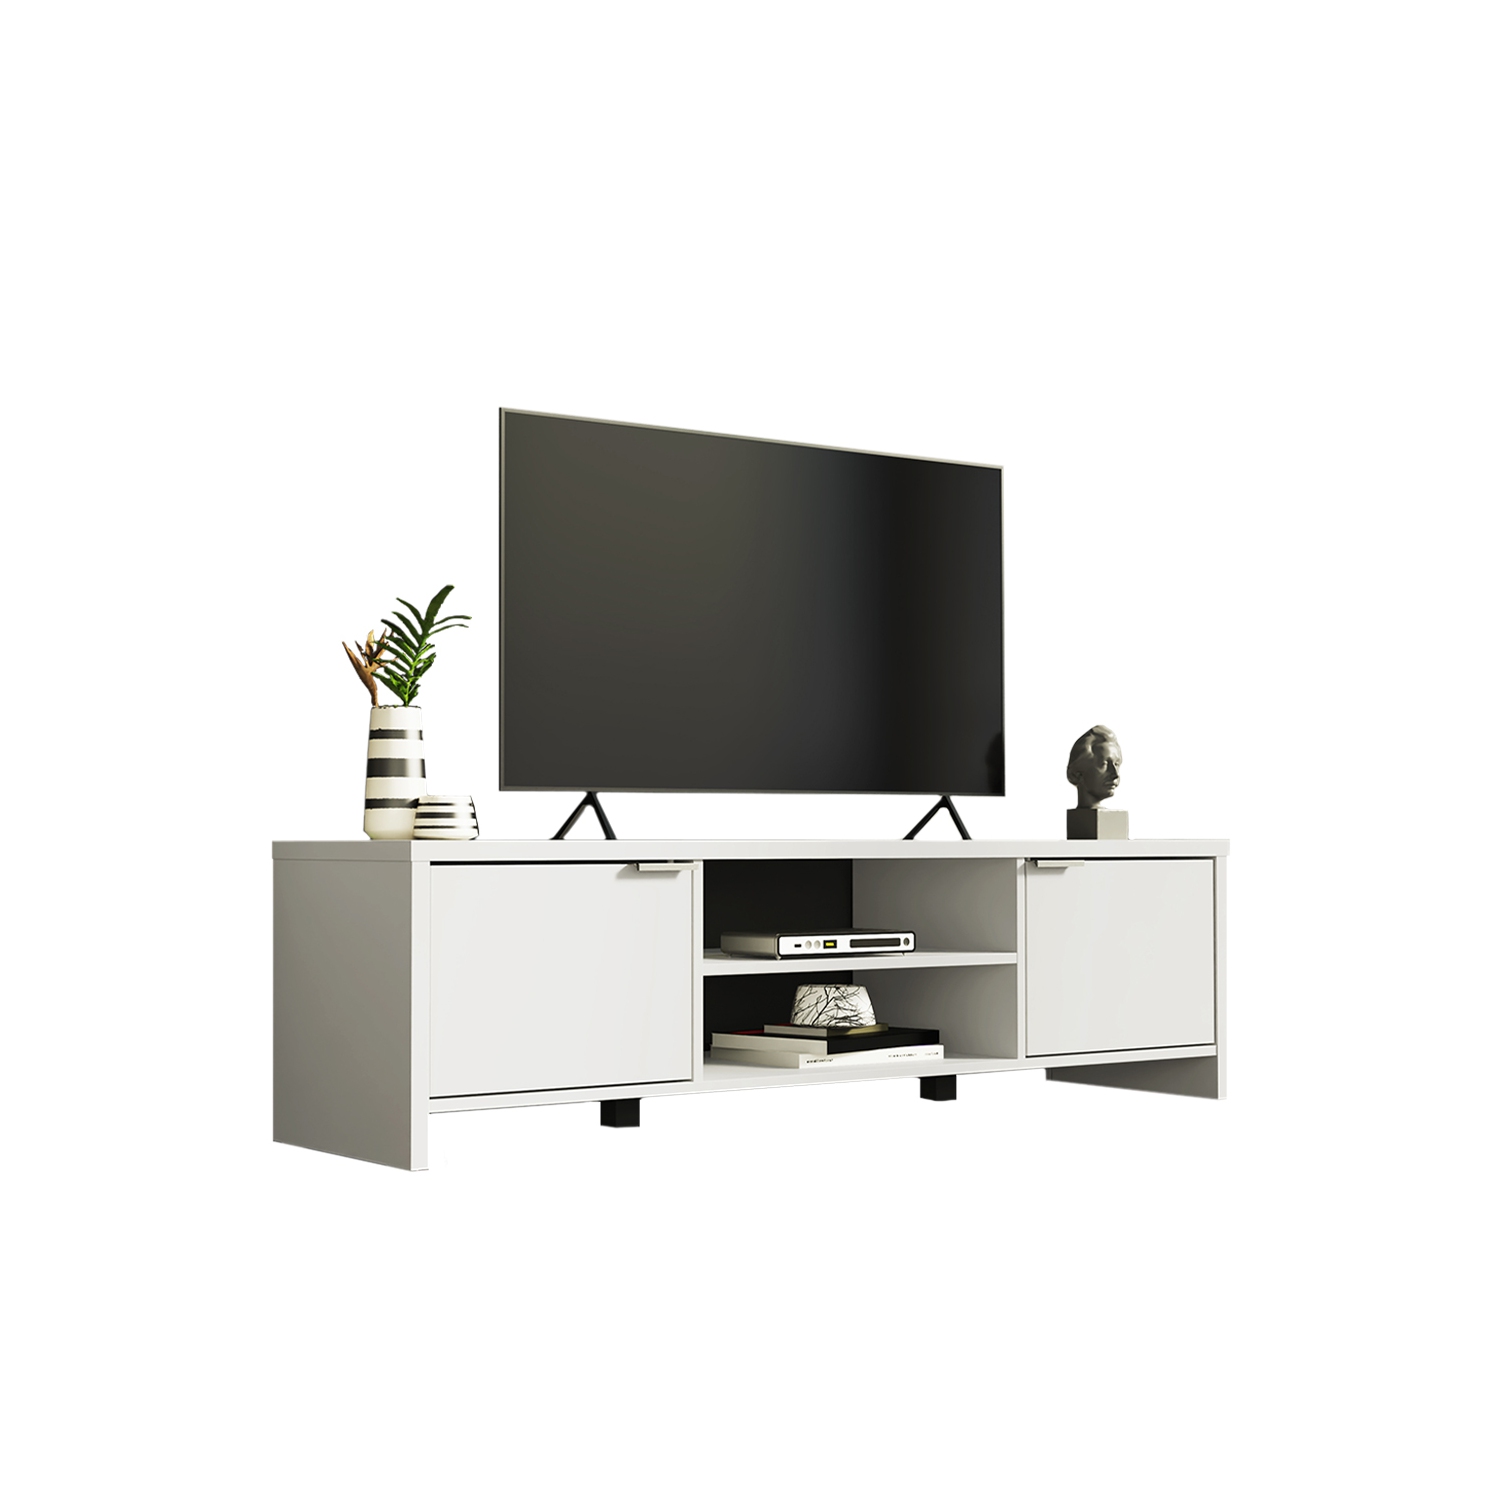 MADESA TV Stand with Storage Space and Cable Management, for TVs up to 65 Inches, Wood, 16” H x 15" D x 57” L - White